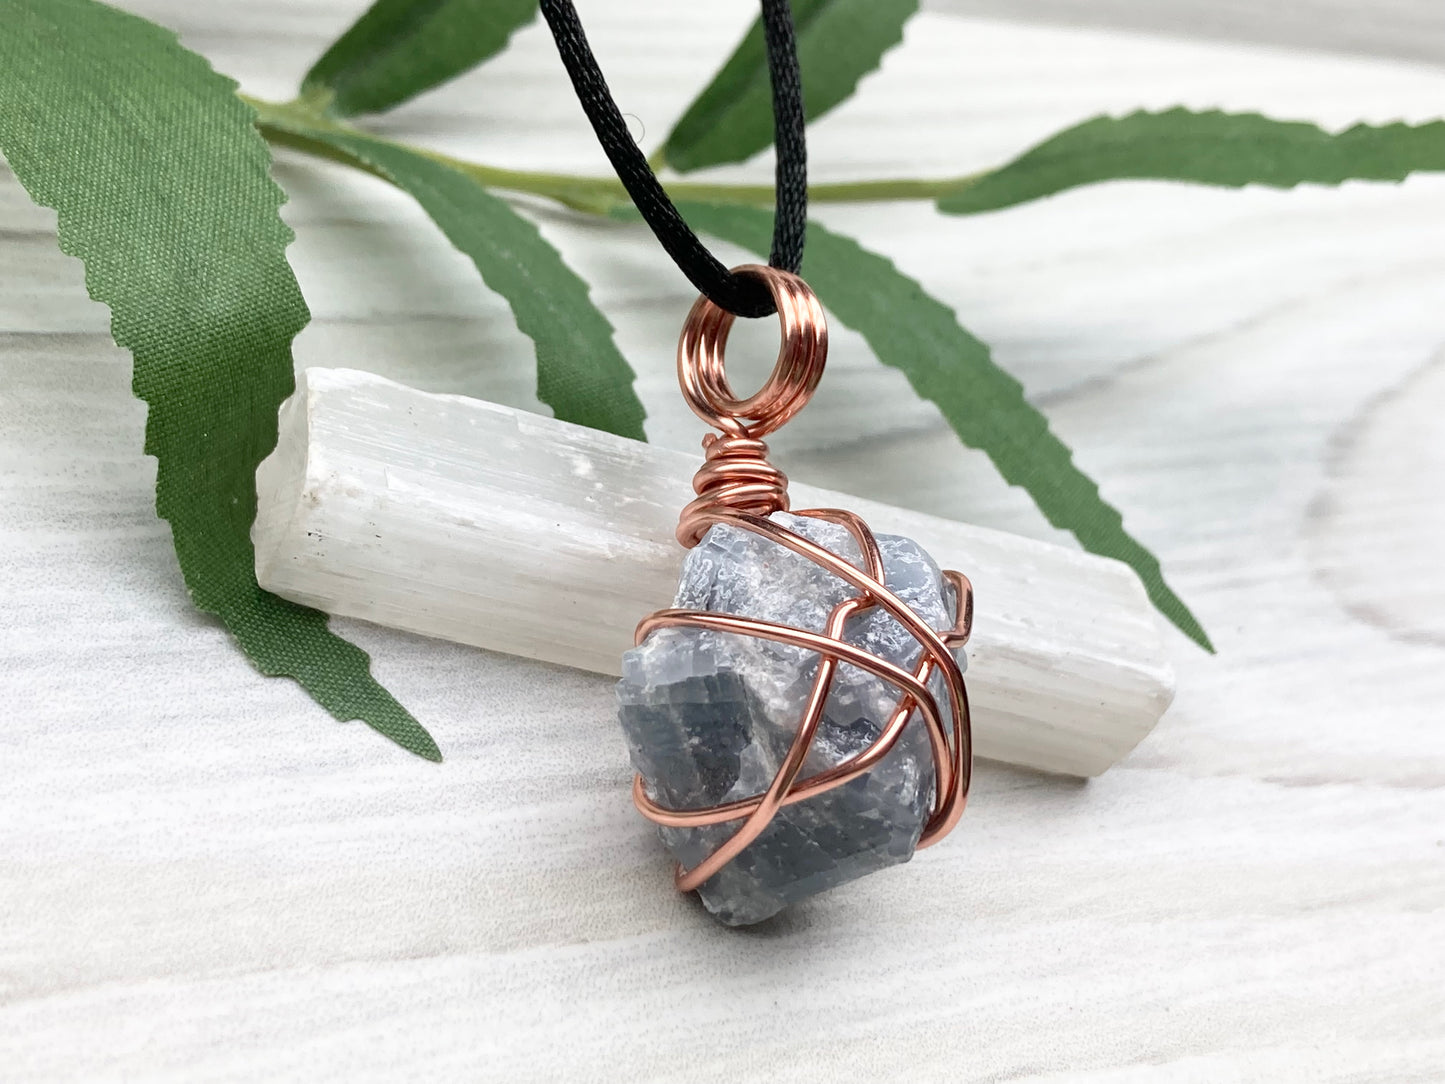 Blue Calcite Necklace. Copper Wire Wrapped Raw Crystal Pendant. Handmade New Age Jewelry. Comes On A Black Chain. Wiccan Pagan Style Jewelry.